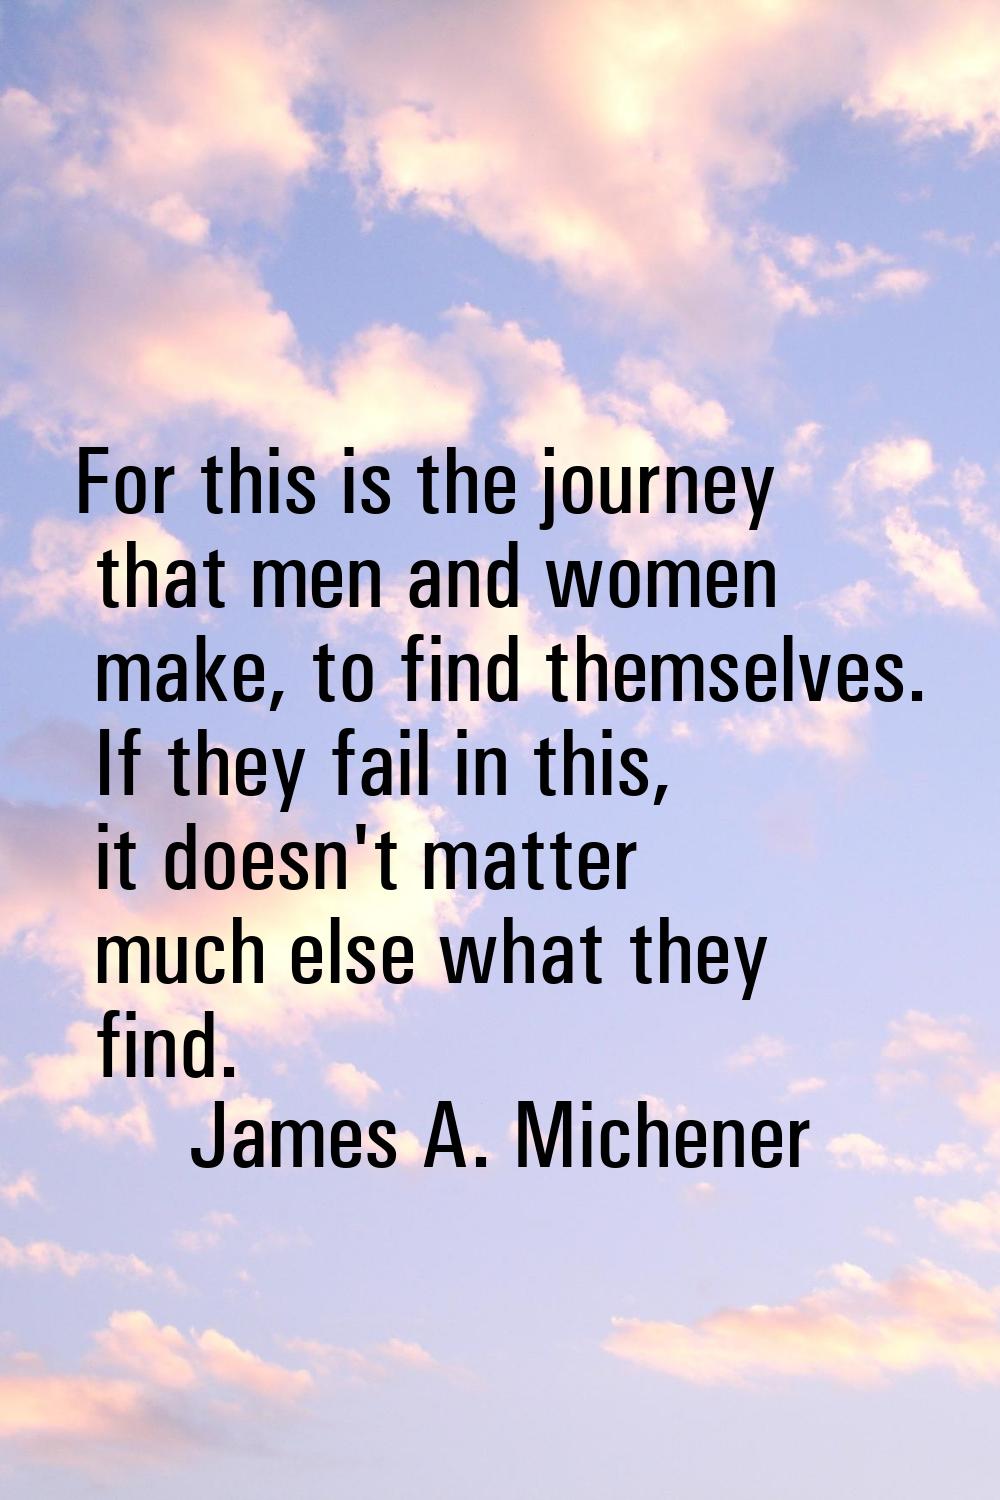 For this is the journey that men and women make, to find themselves. If they fail in this, it doesn